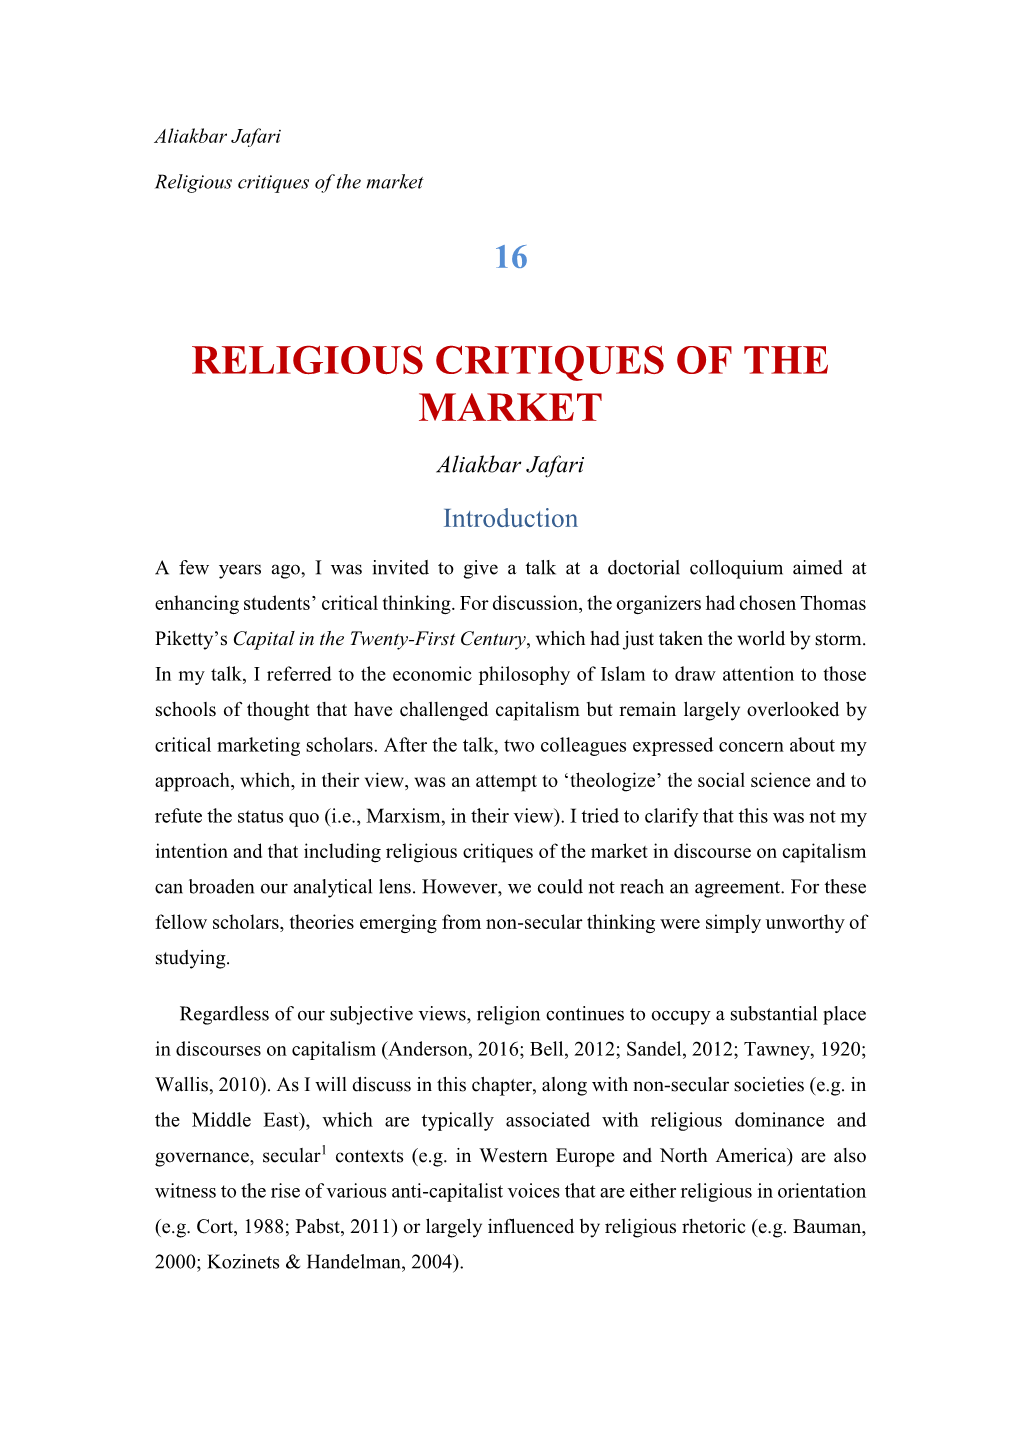 Religious Critiques of the Market